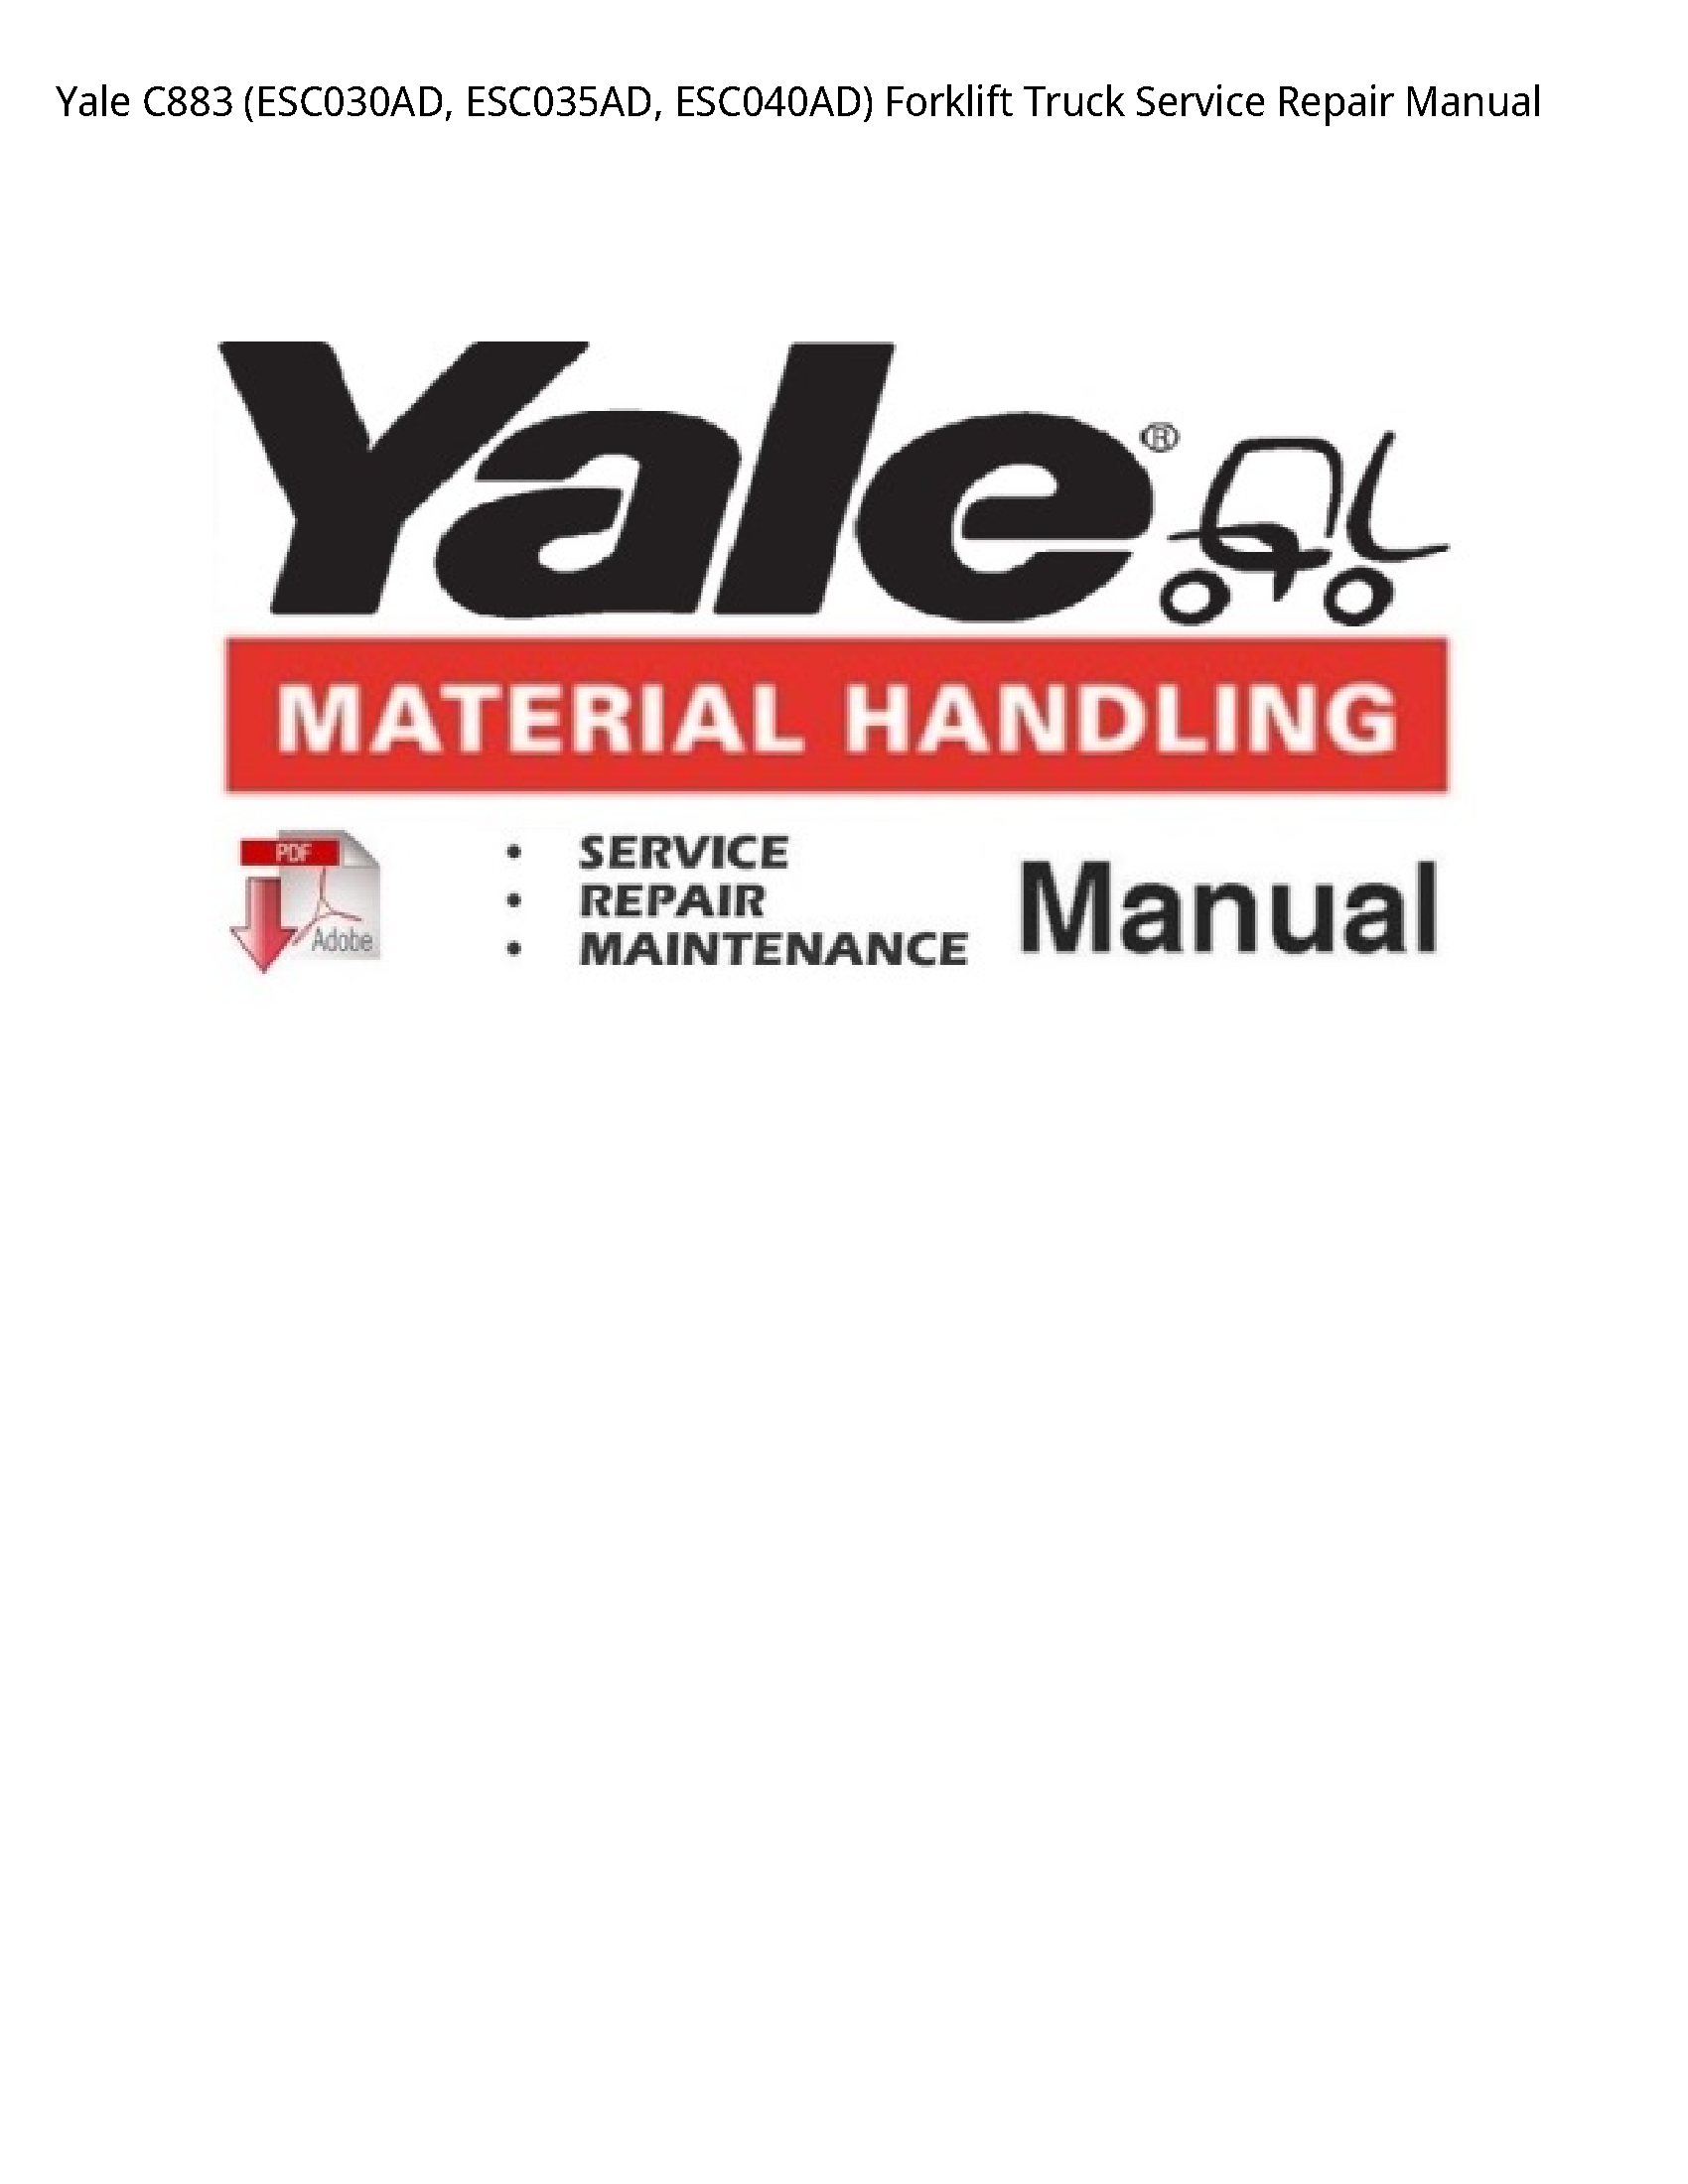 Yale C883 Forklift Truck manual